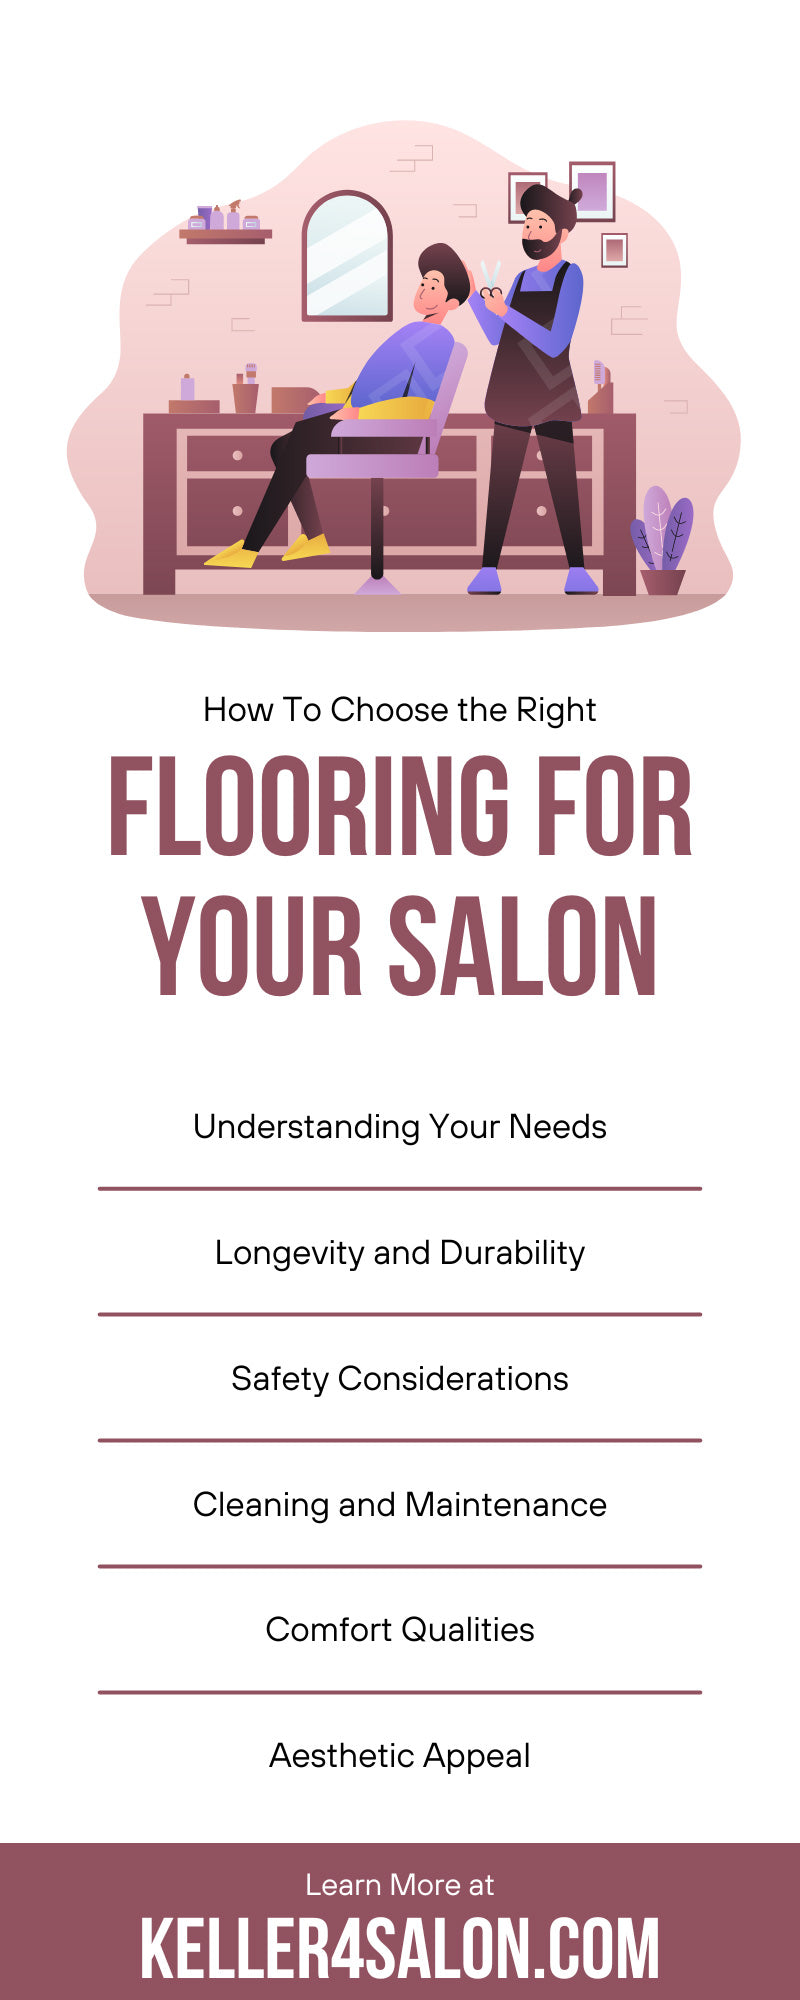 How To Choose the Right Flooring for Your Salon